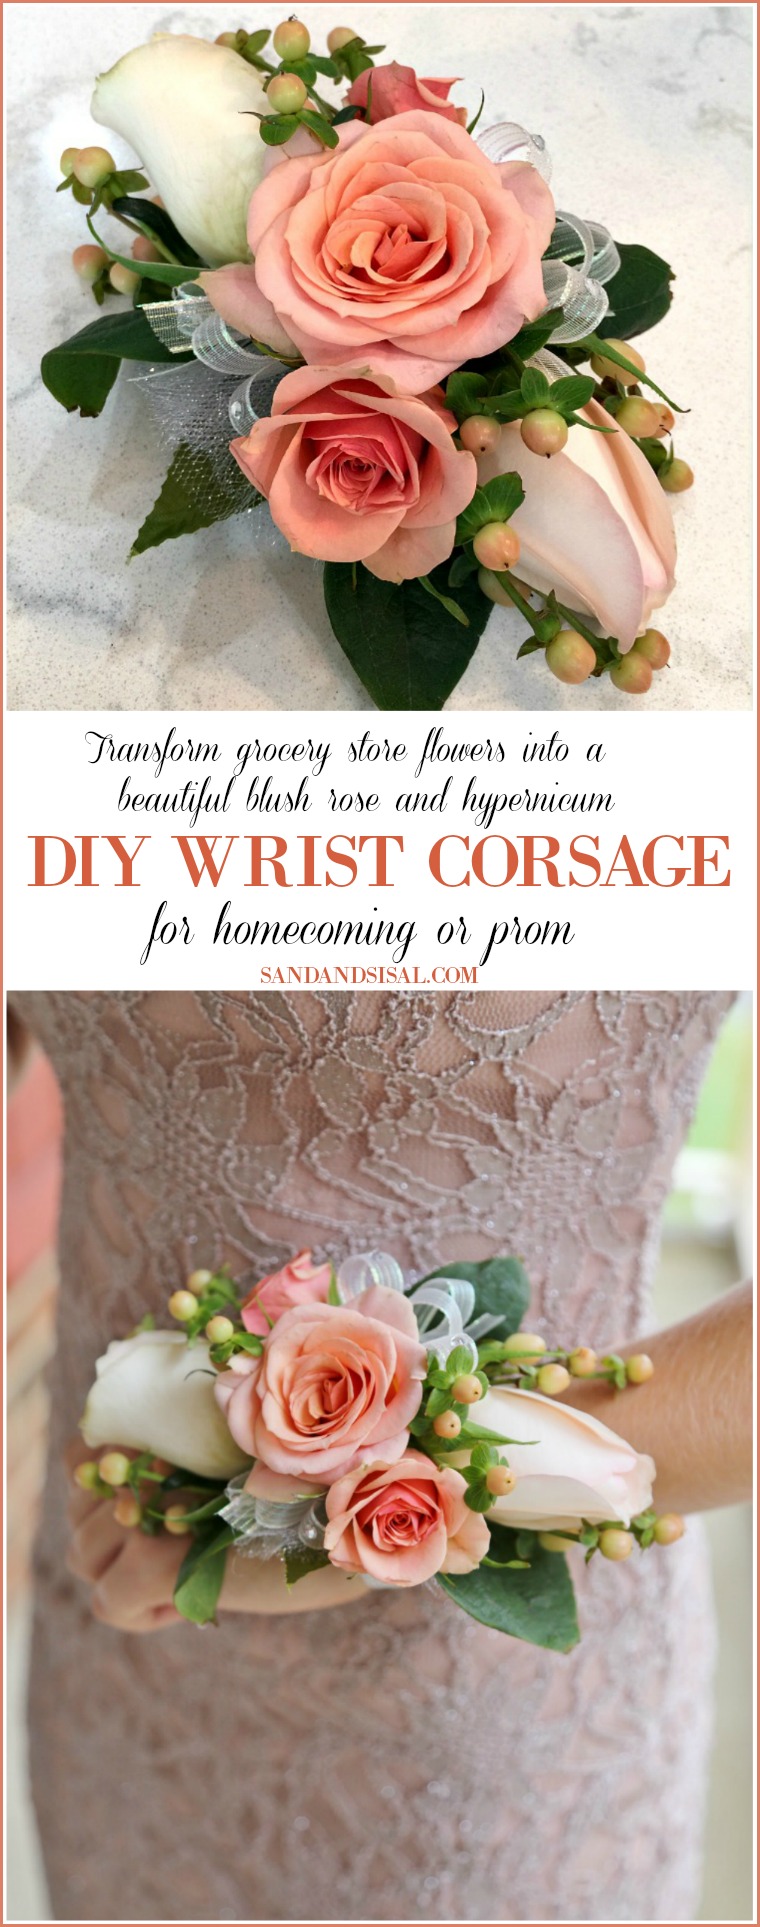 DIY Wrist Corsage for Homecoming or Prom